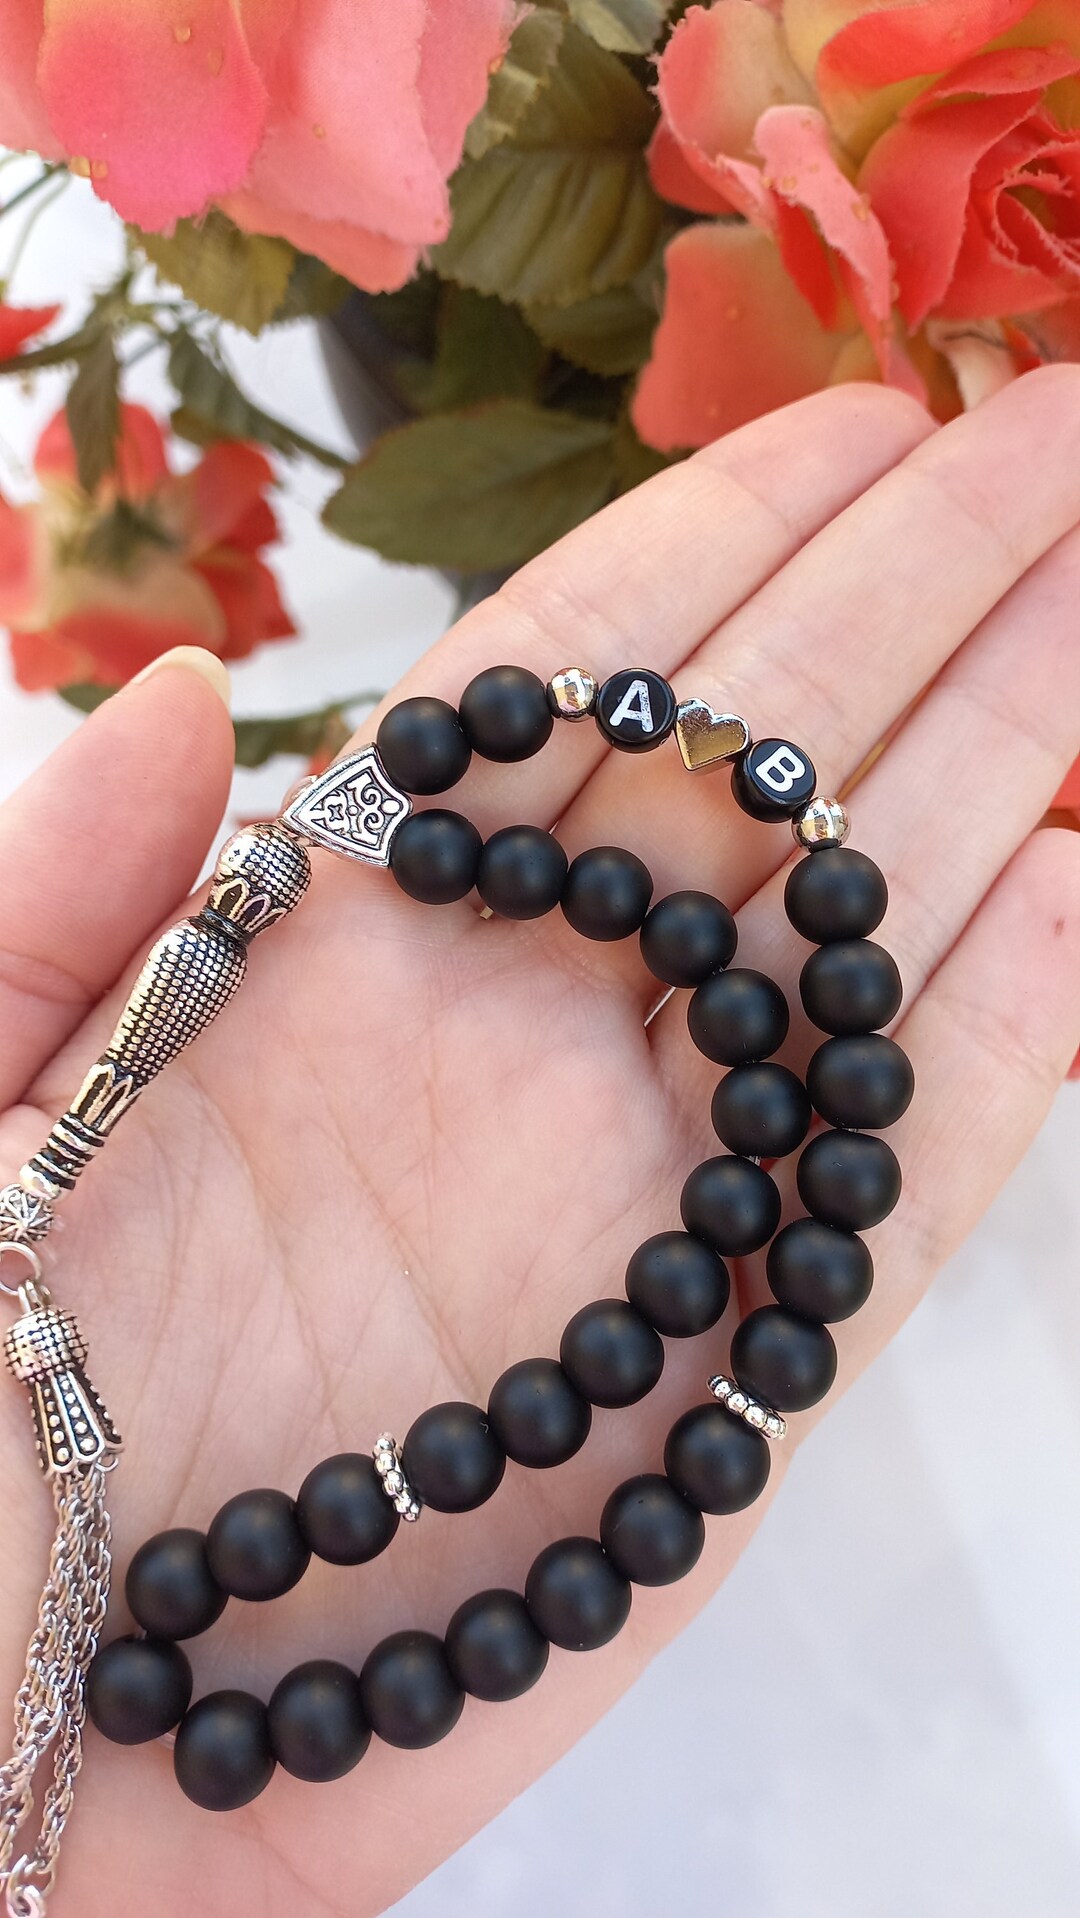 Black Onyx Tasbih With Name Tesbih, Personalized With Initials and ...